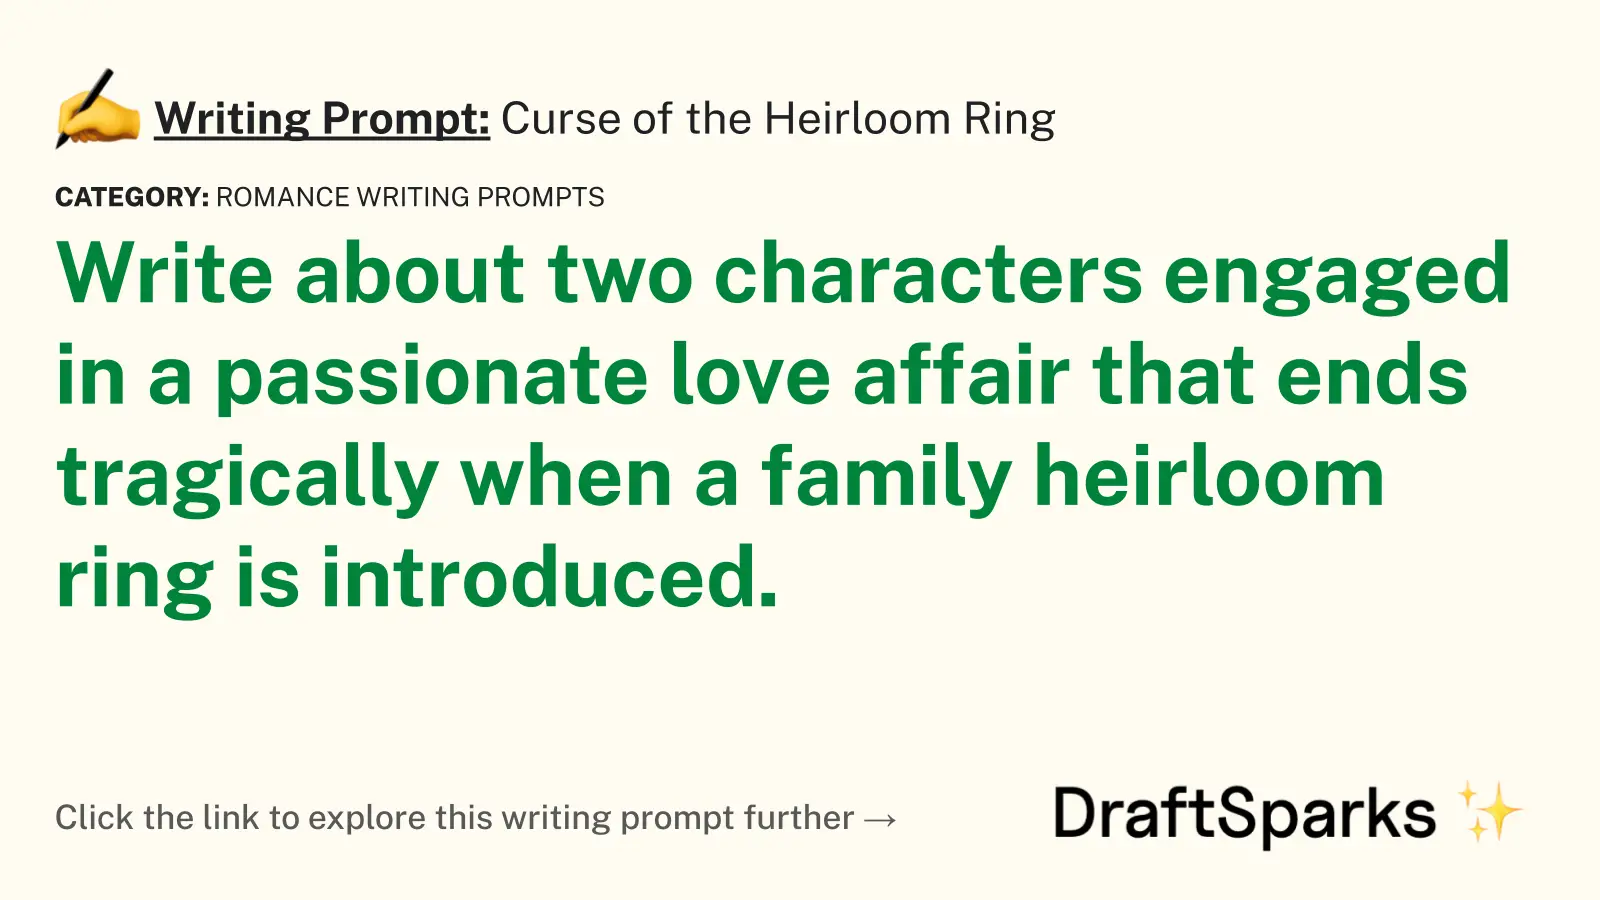 Curse of the Heirloom Ring